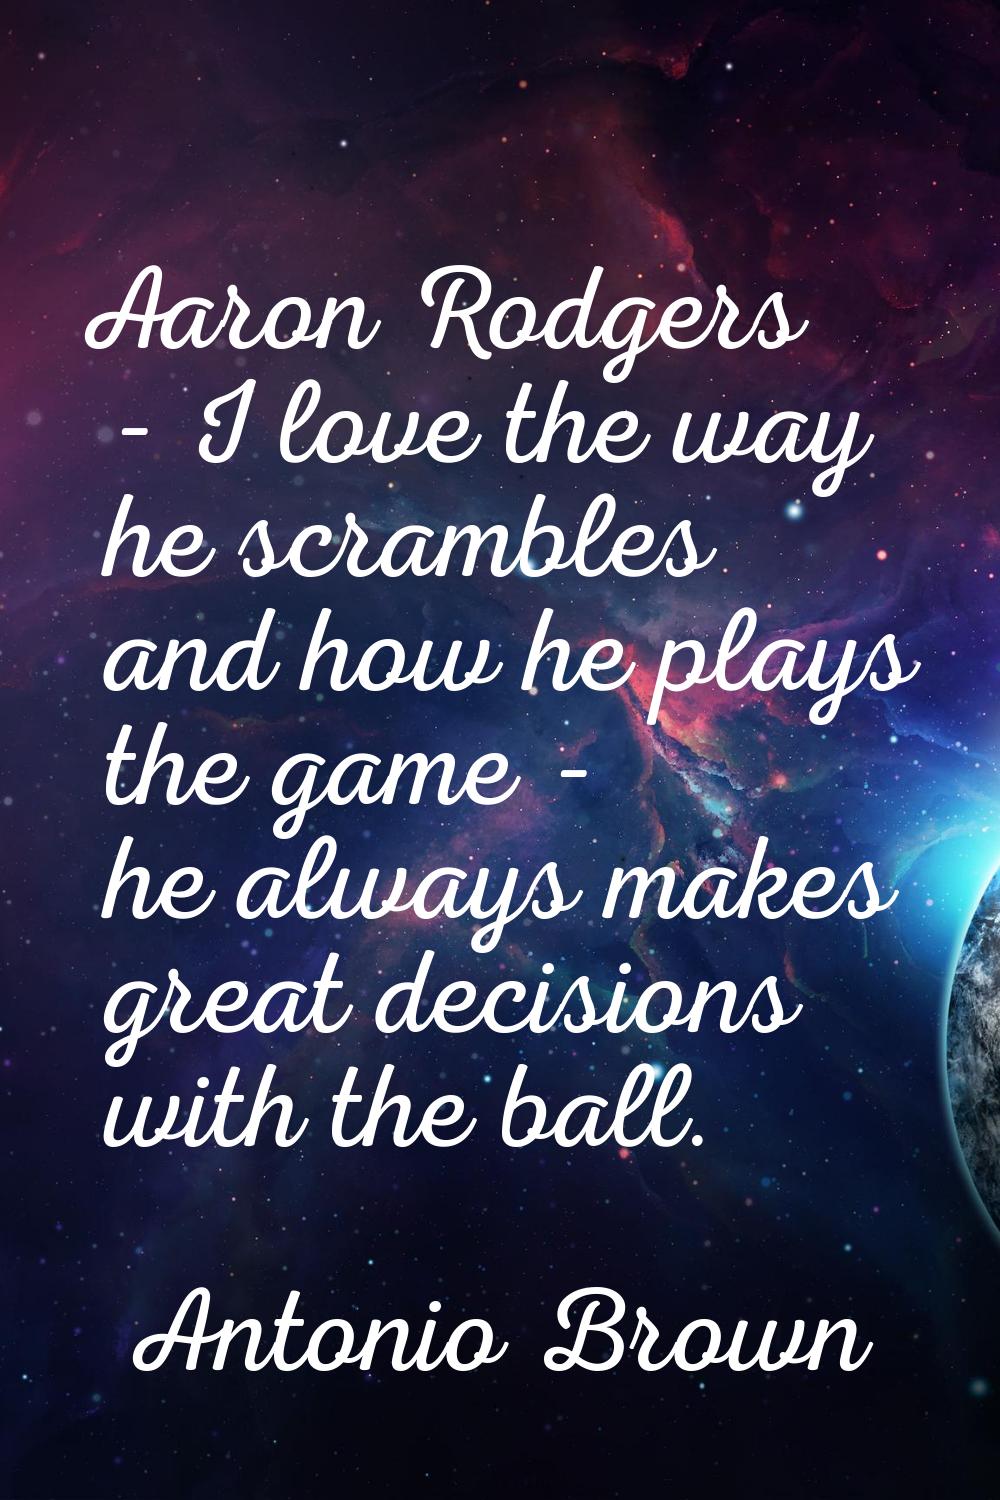 Aaron Rodgers - I love the way he scrambles and how he plays the game - he always makes great decis